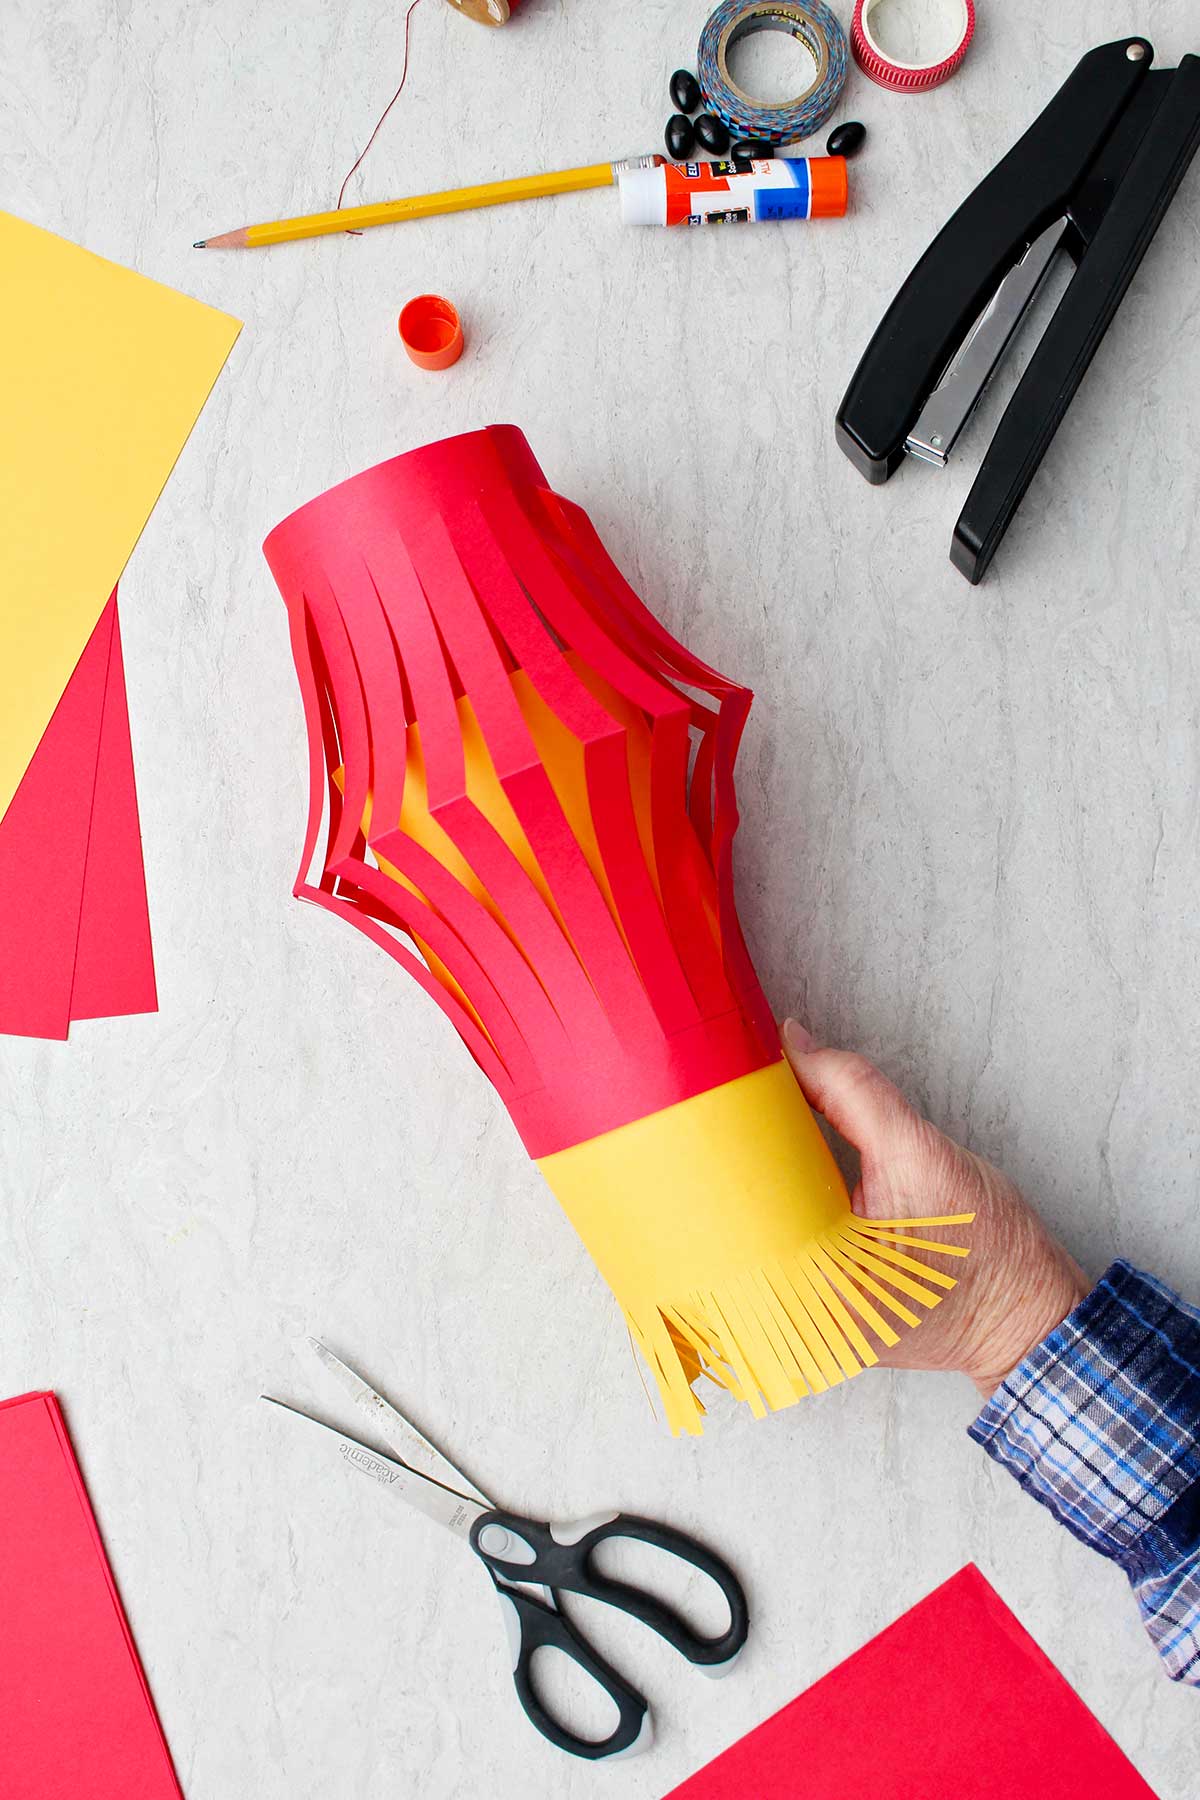 Hand placing the yellow inside part with fringe into the red paper lantern.